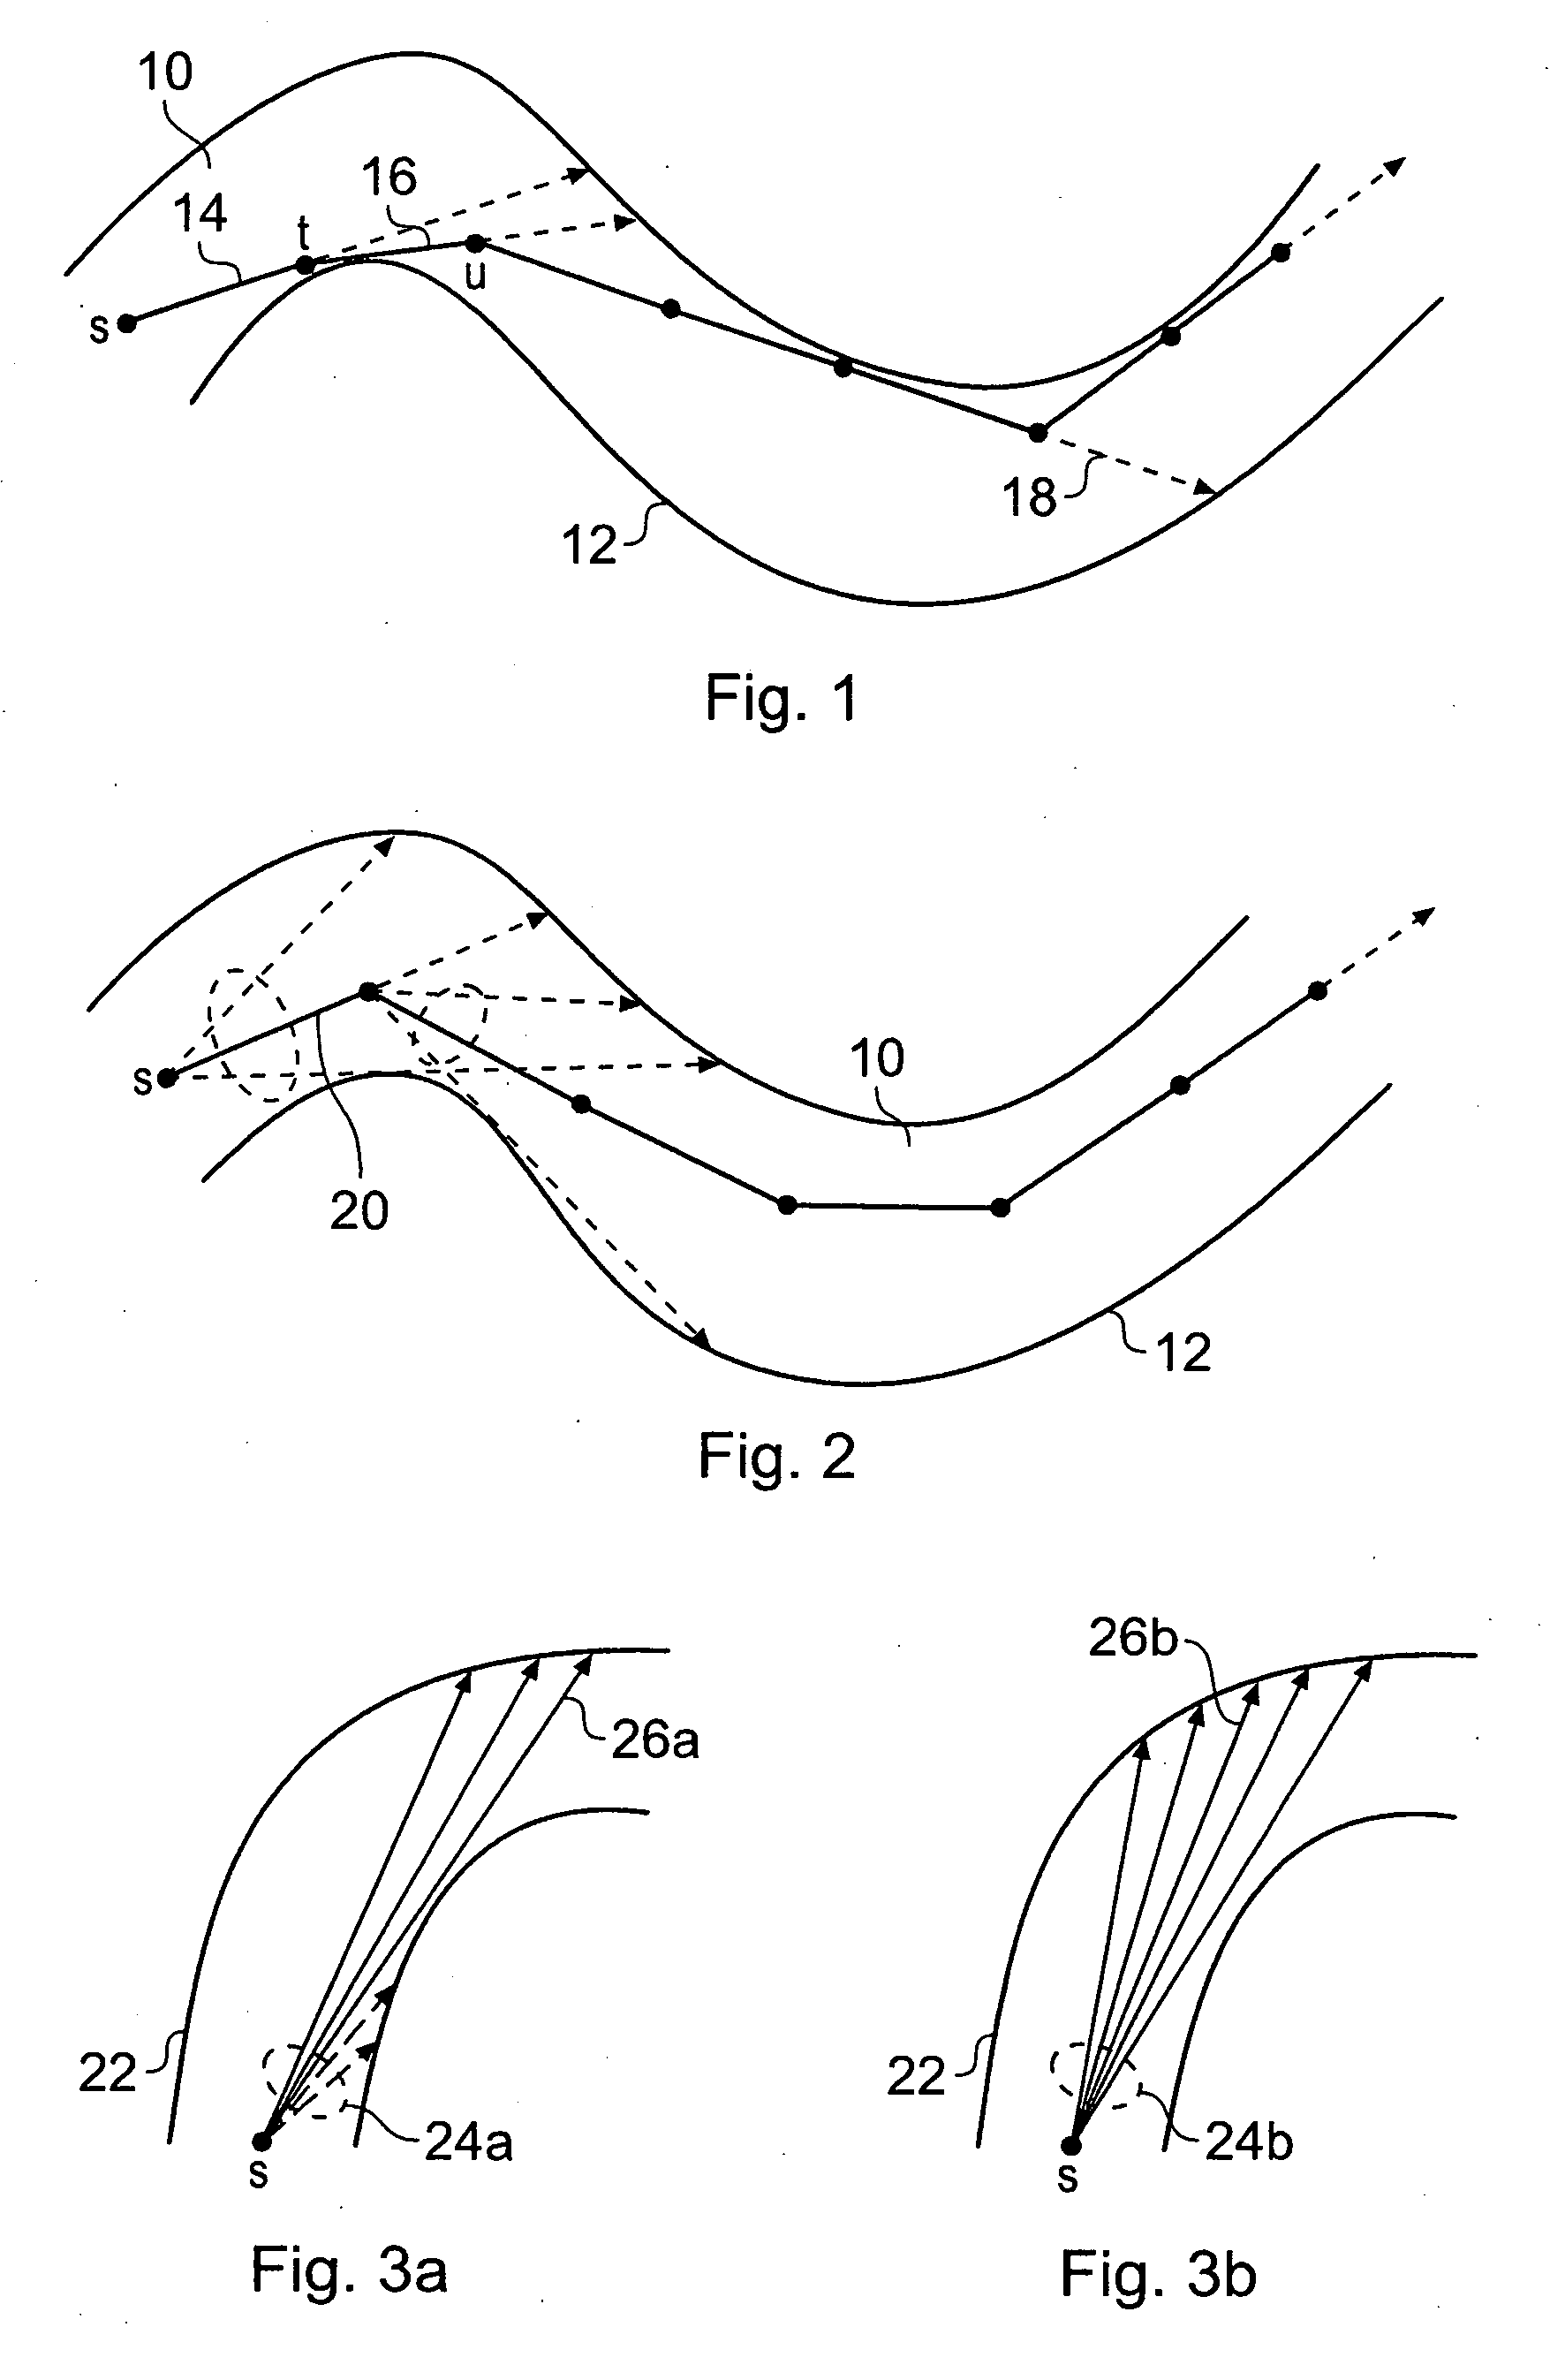 Method for navigating a virtual camera along a biological object with a lumen